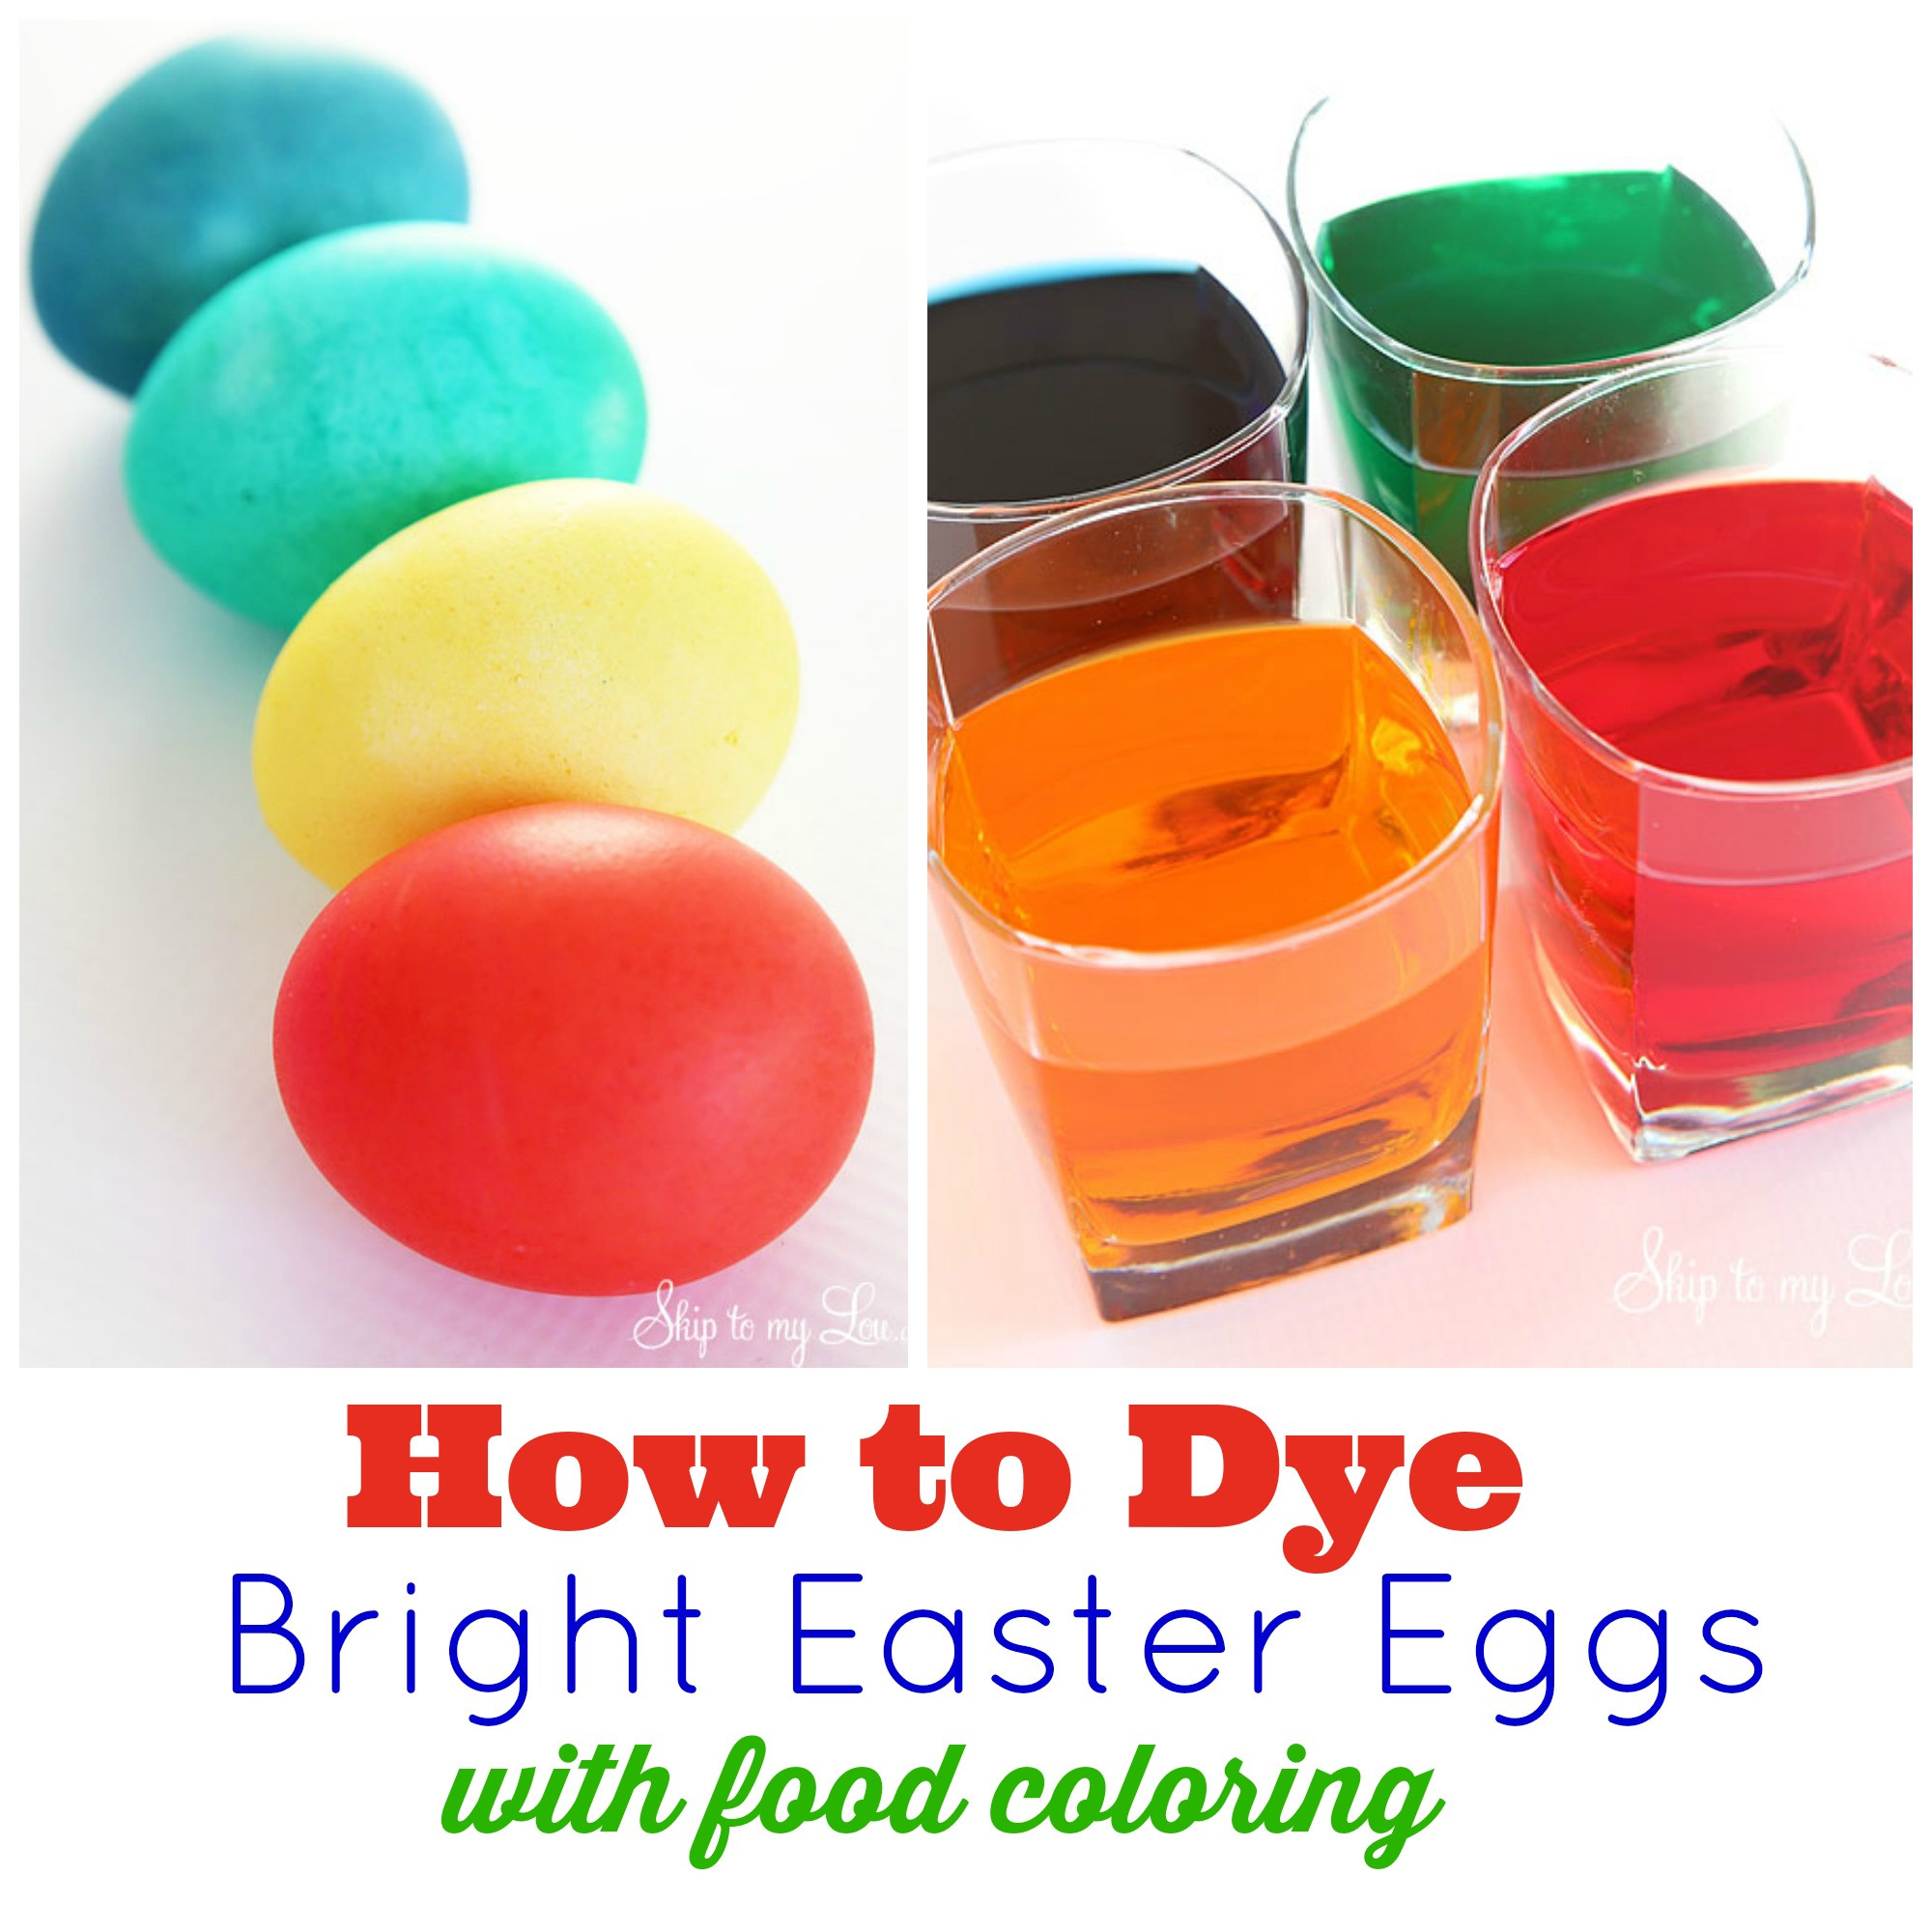 How To Make Easter Egg Dye With Food Coloring
 How to dye eggs with food coloring